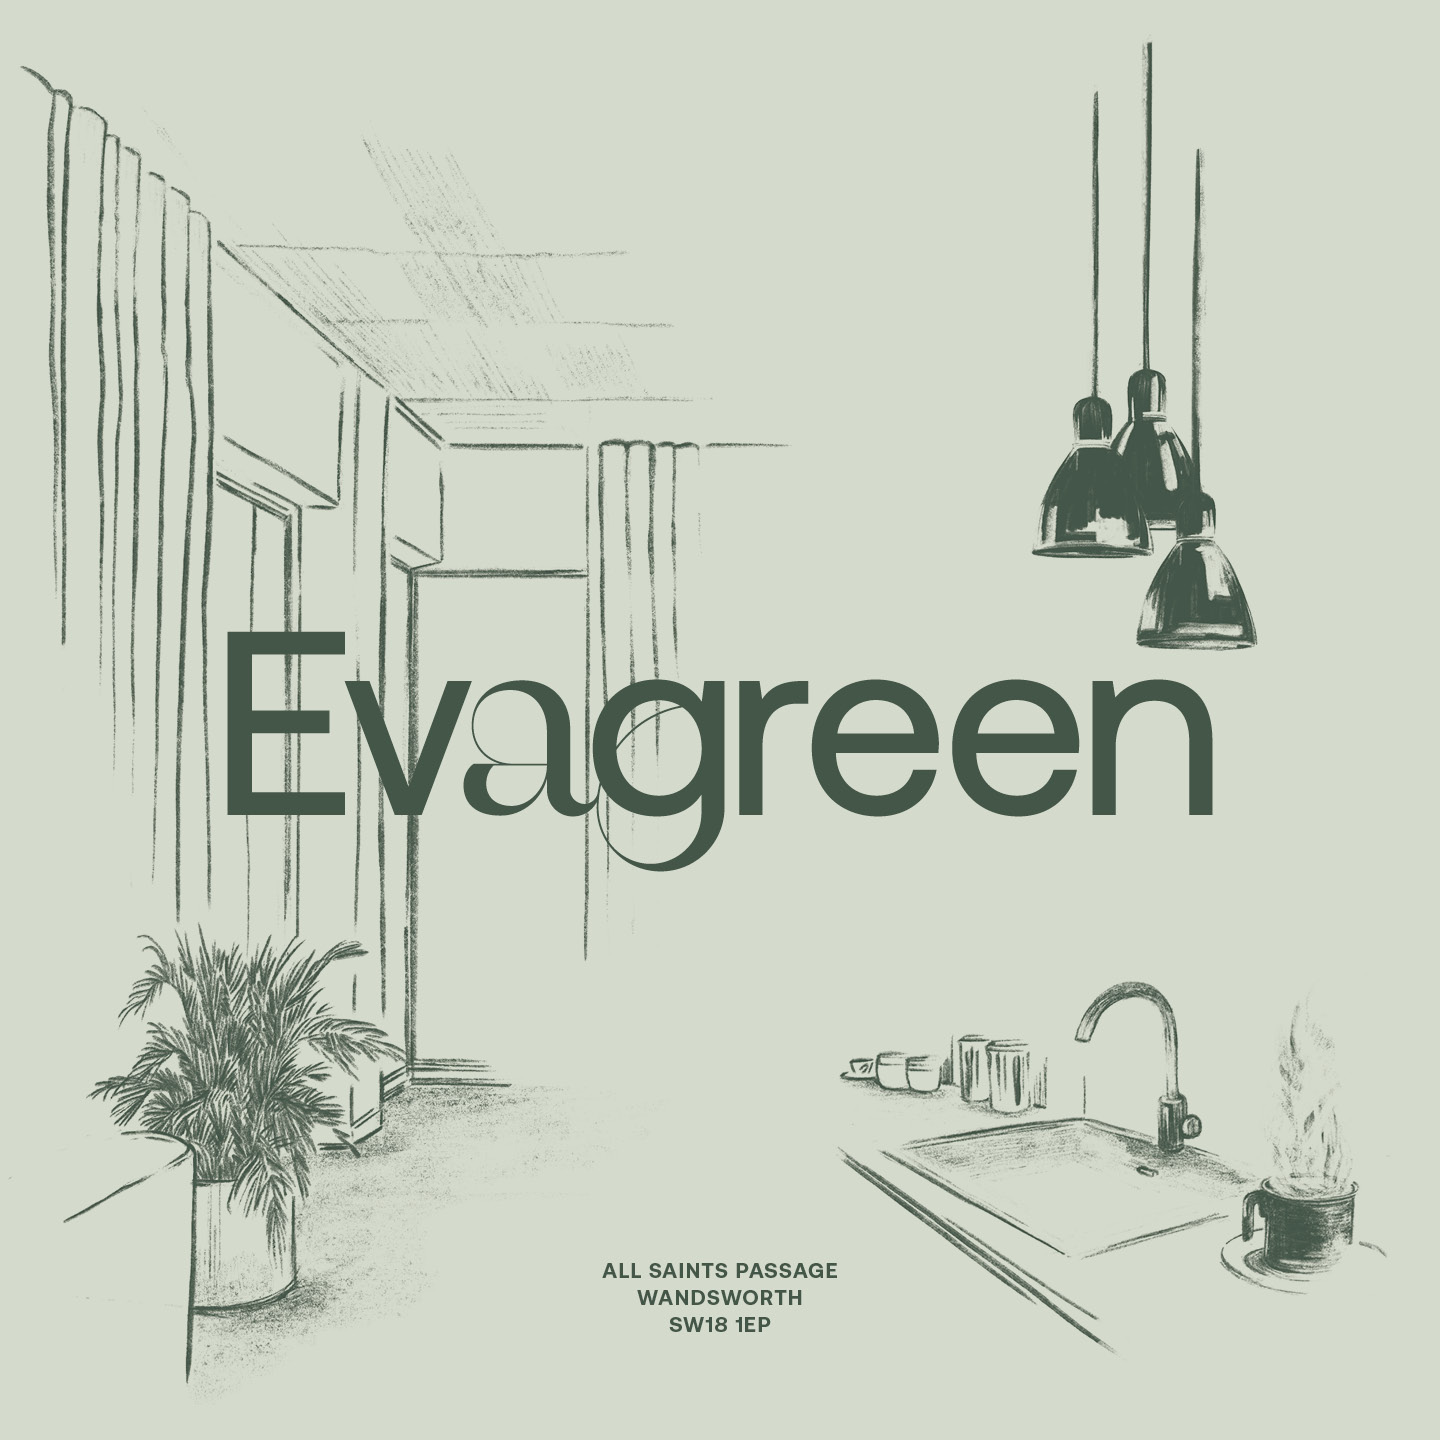 Crafting Evagreen Brand: Designing a Sustainable Identity for a Unique Residential Development